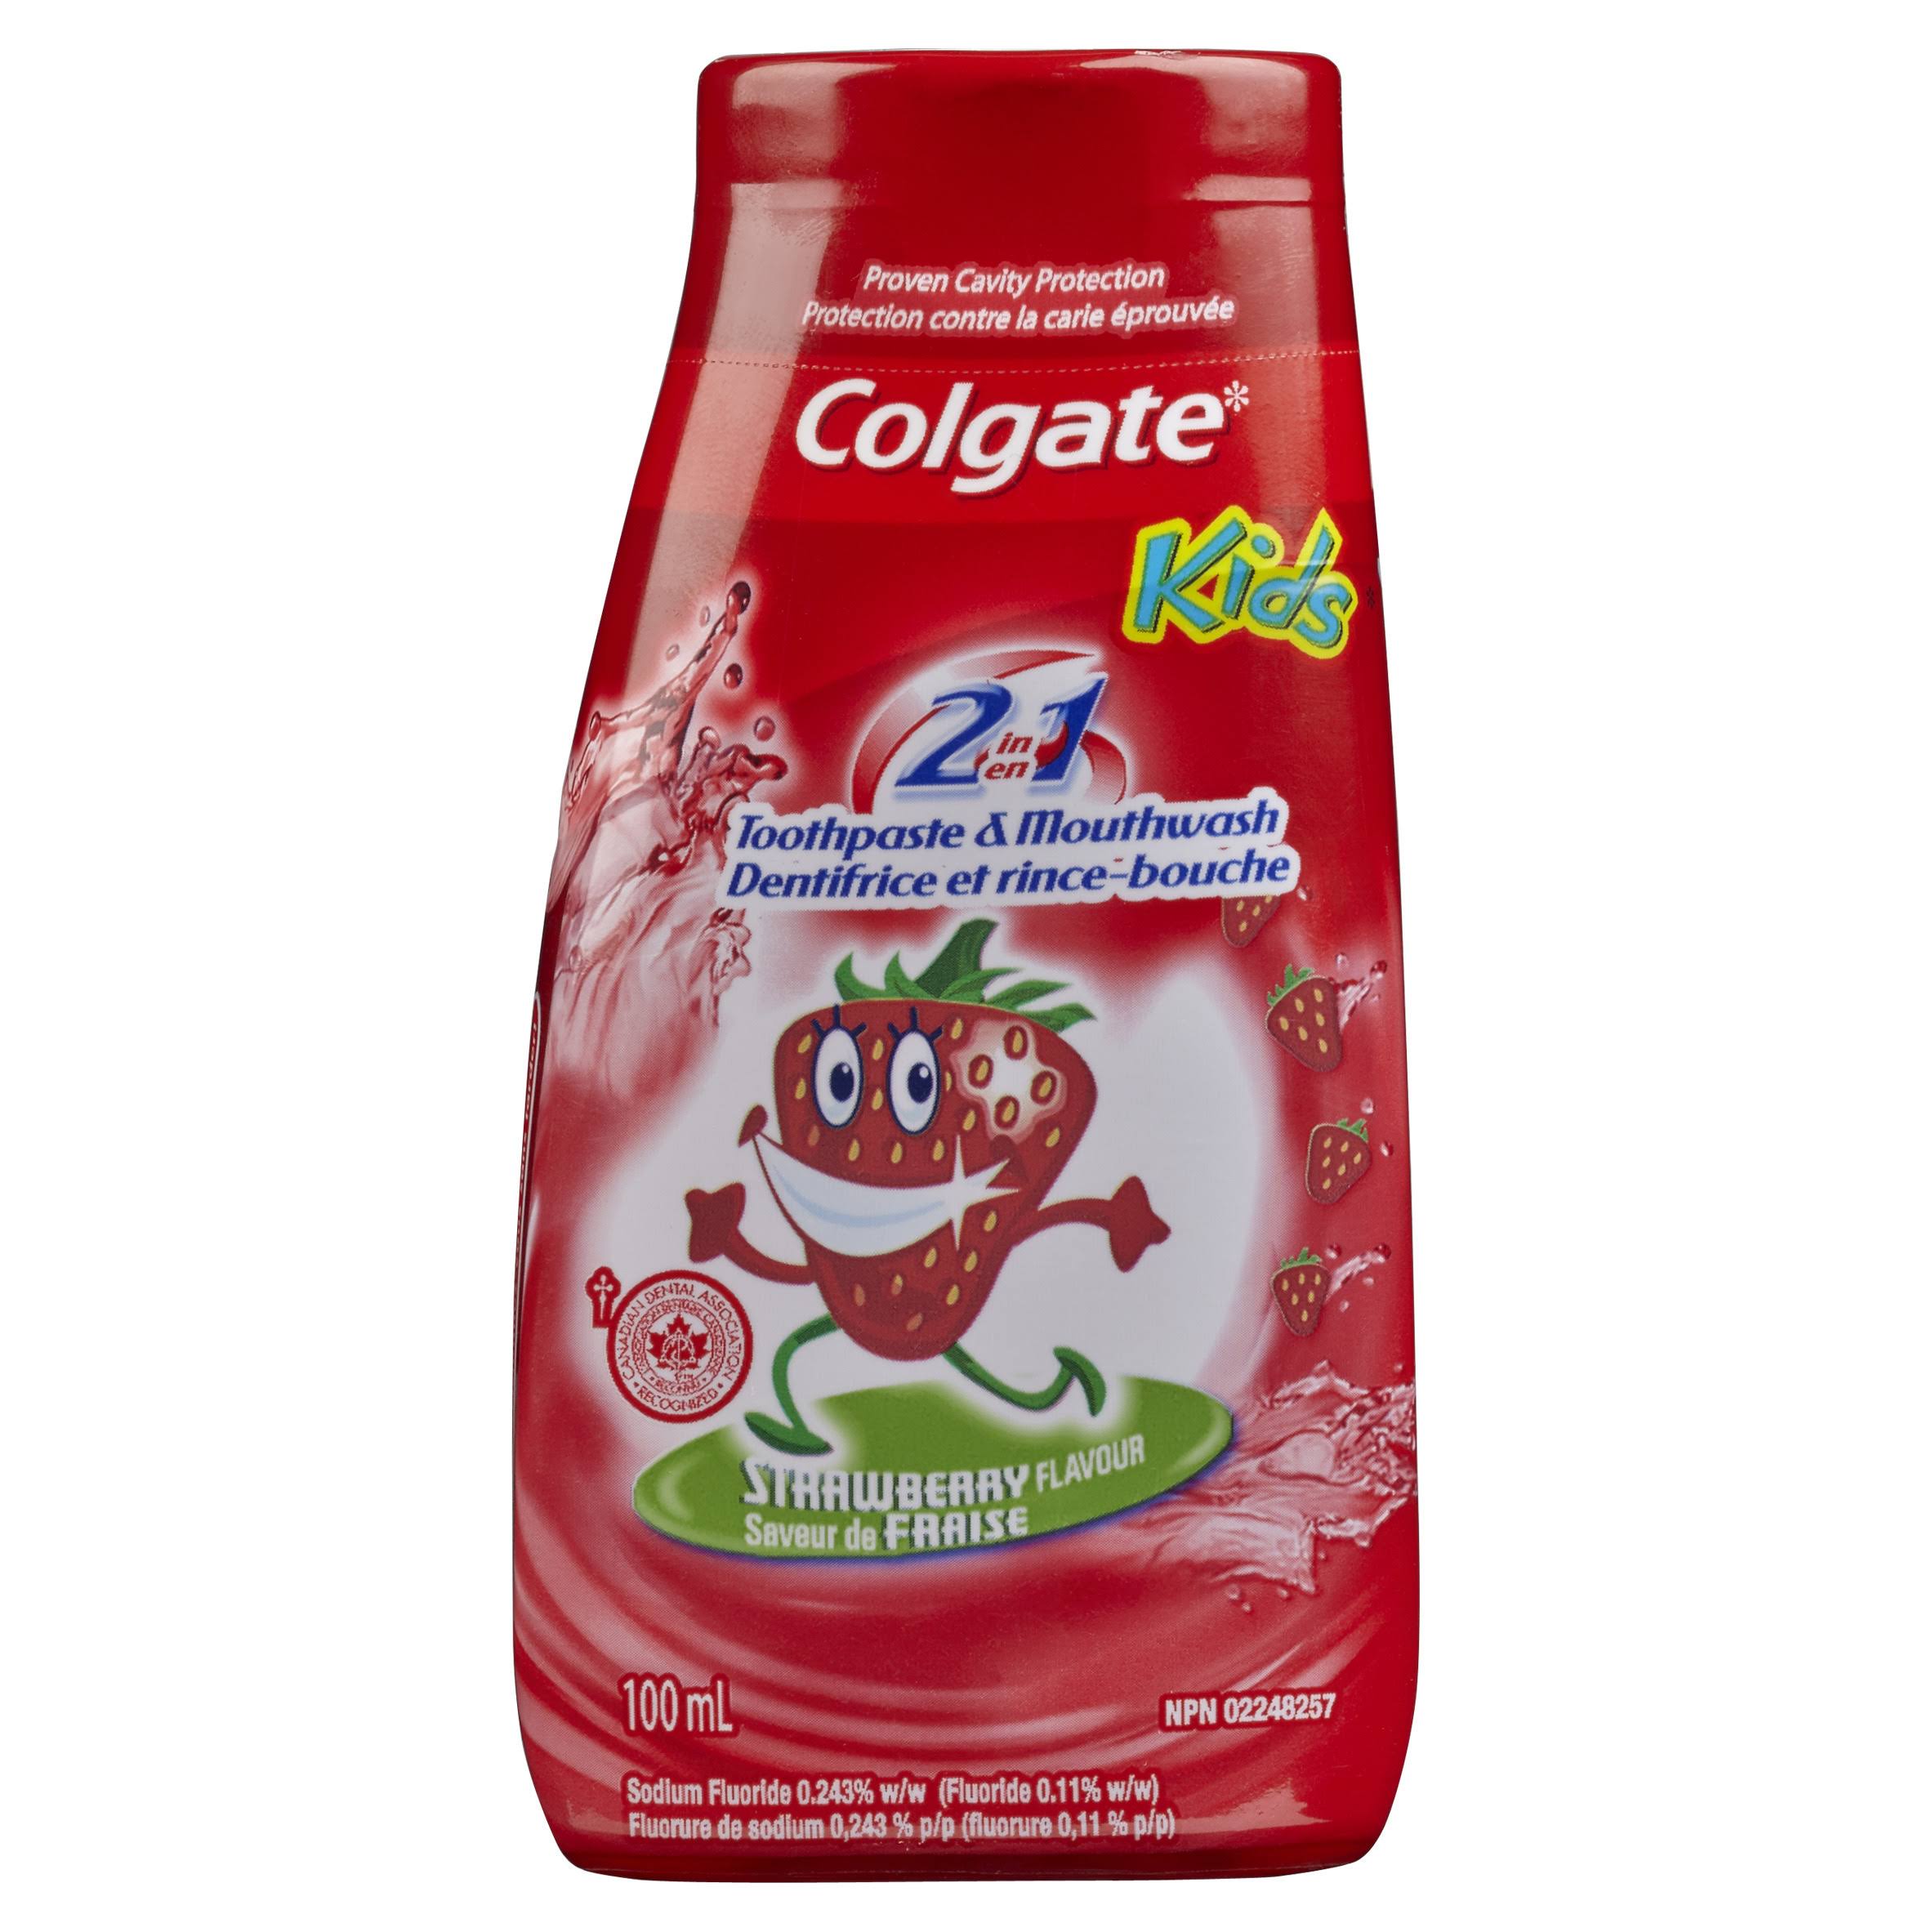 Colgate Kids 2 in 1 Toothpaste and Mouthwash - Strawberry Flavour, 100ml